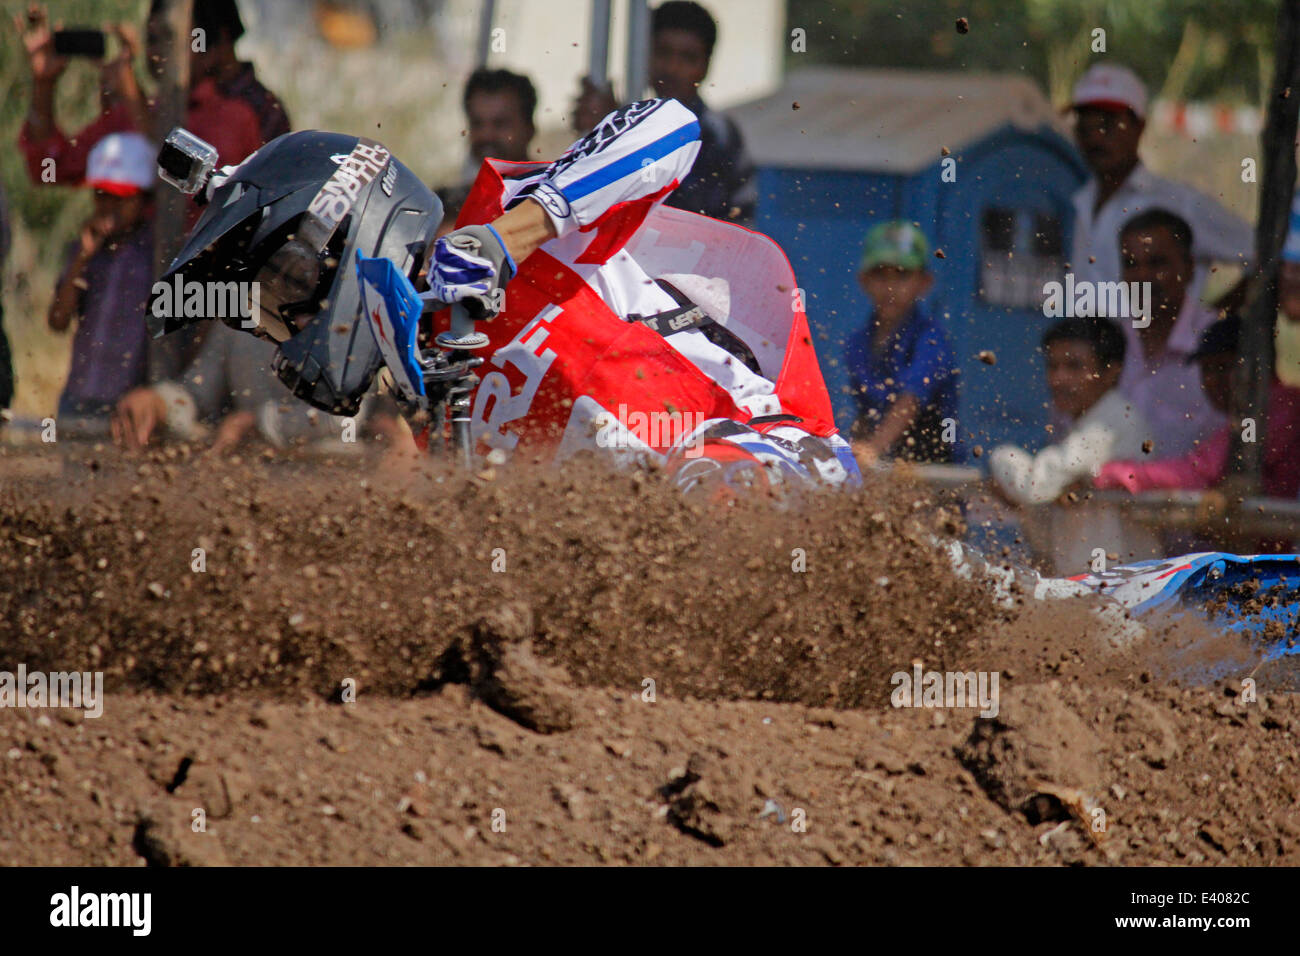 Dirt Track Motorcycle Racing Stock Photo